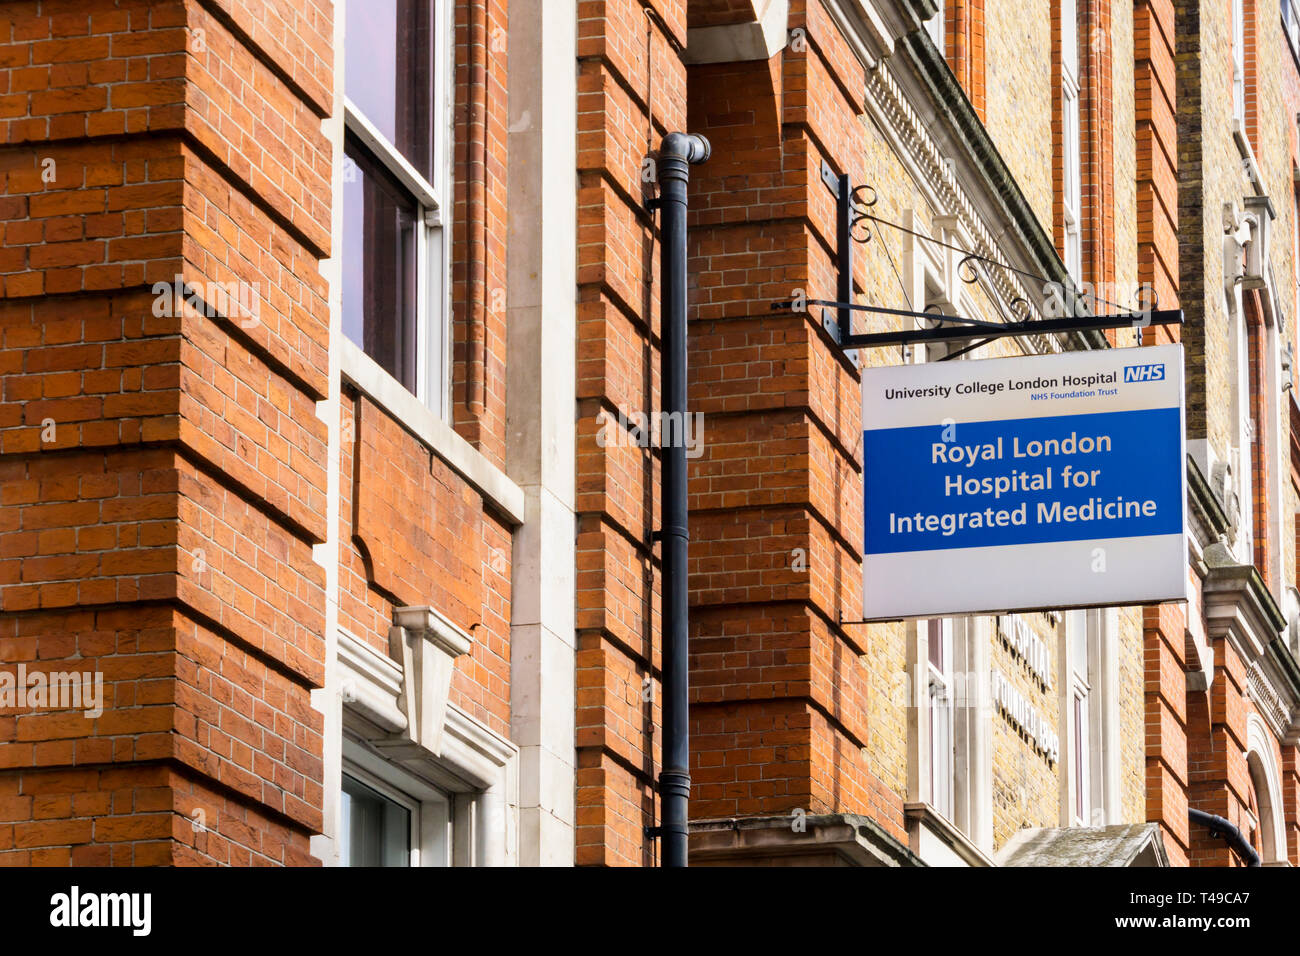 The Royal London Hospital for Integrated Medicine was formerly the Royal London Homeopathic Hospital. Stock Photo